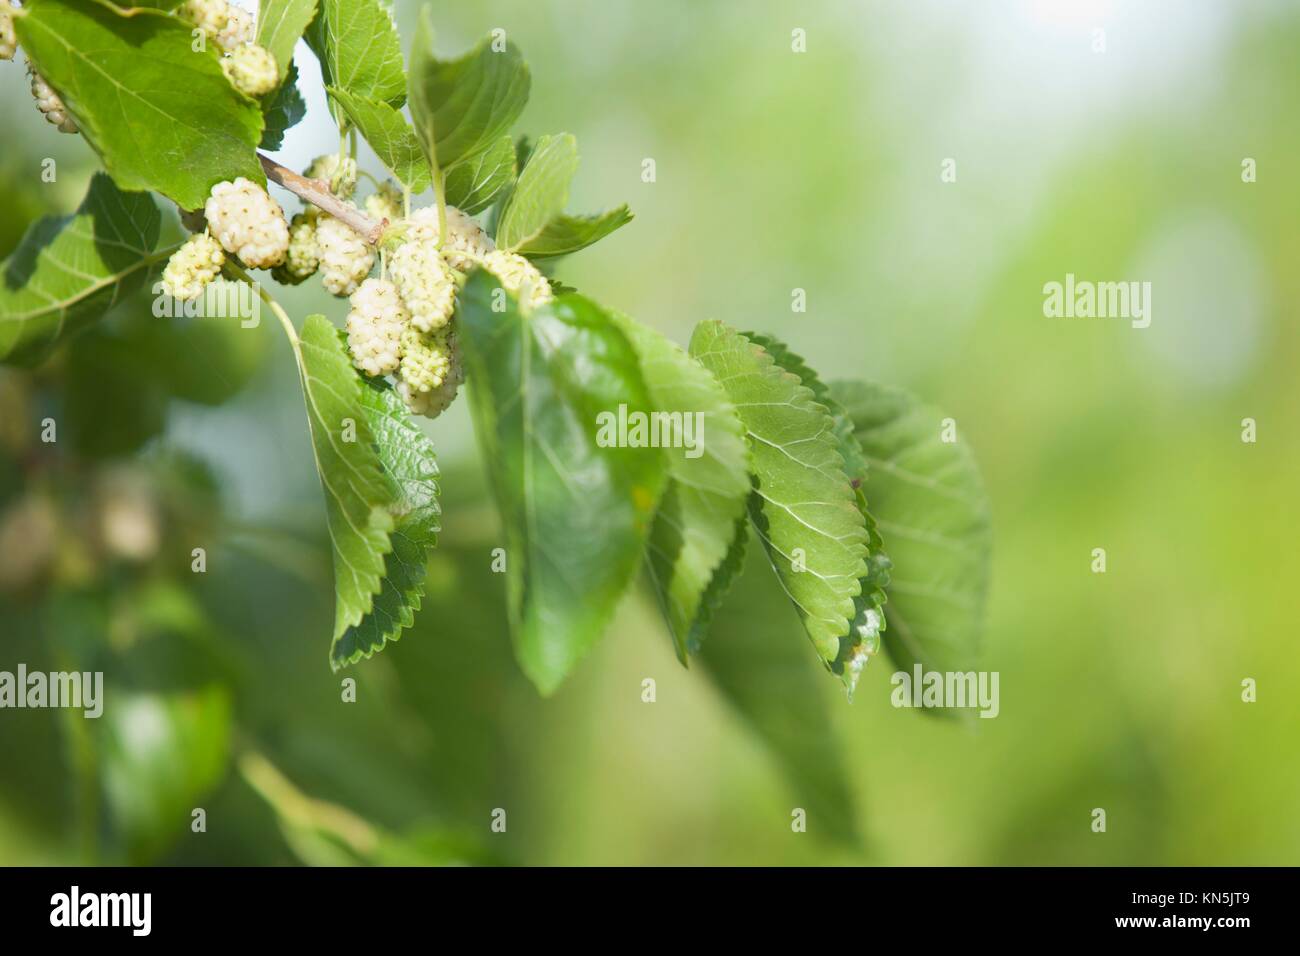 Branch with mature white mulberry fruits and green leafs on springtime. Stock Photo